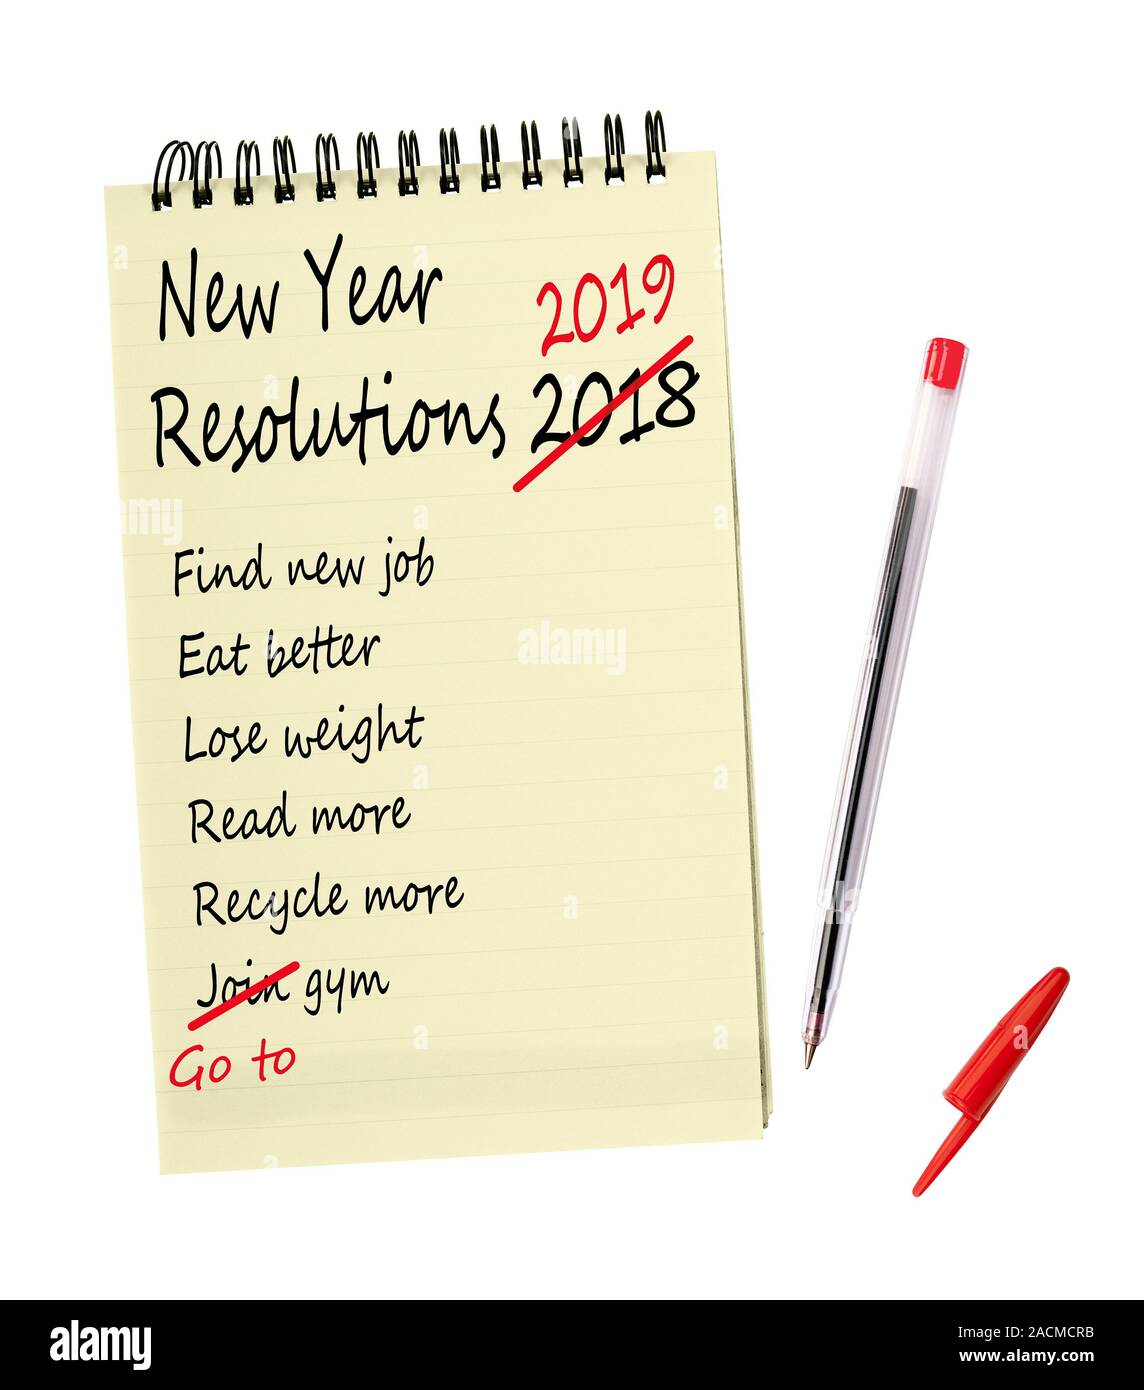 New year resolutions 2019 - same again. Notepad list isolated on white with pen. Stock Photo